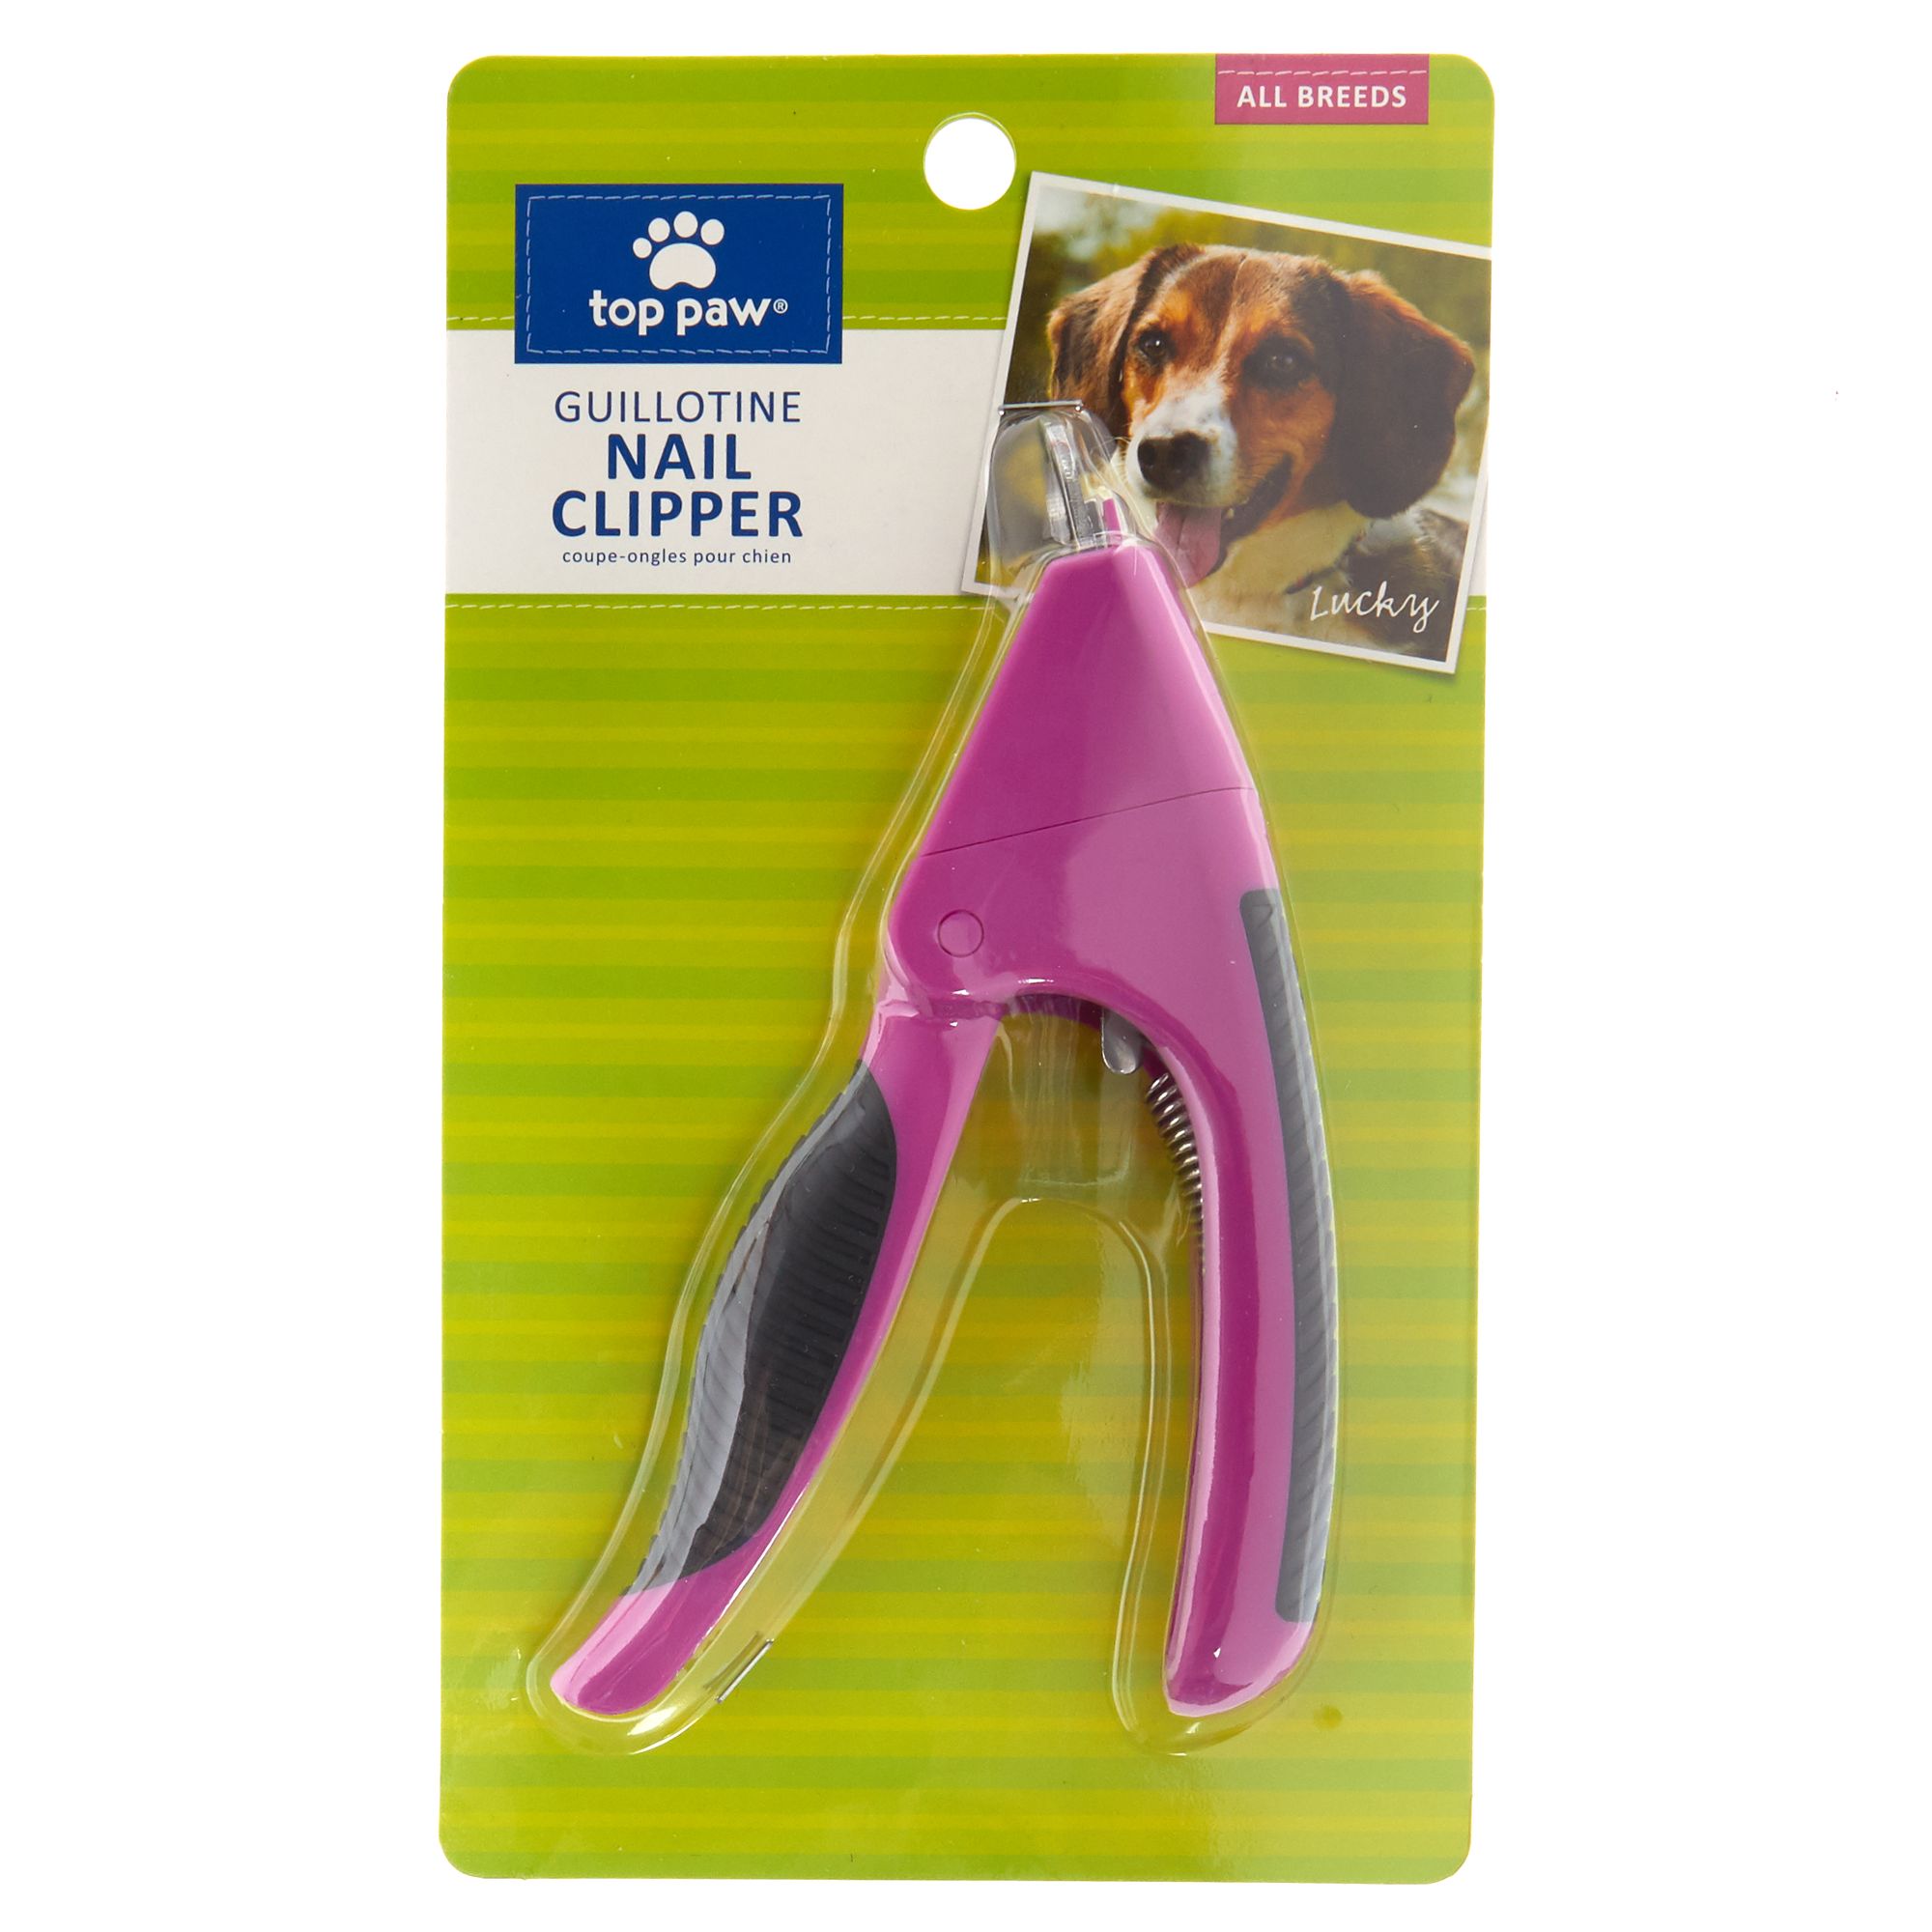 Top Paw® Guillotine Nail Clipper | dog 